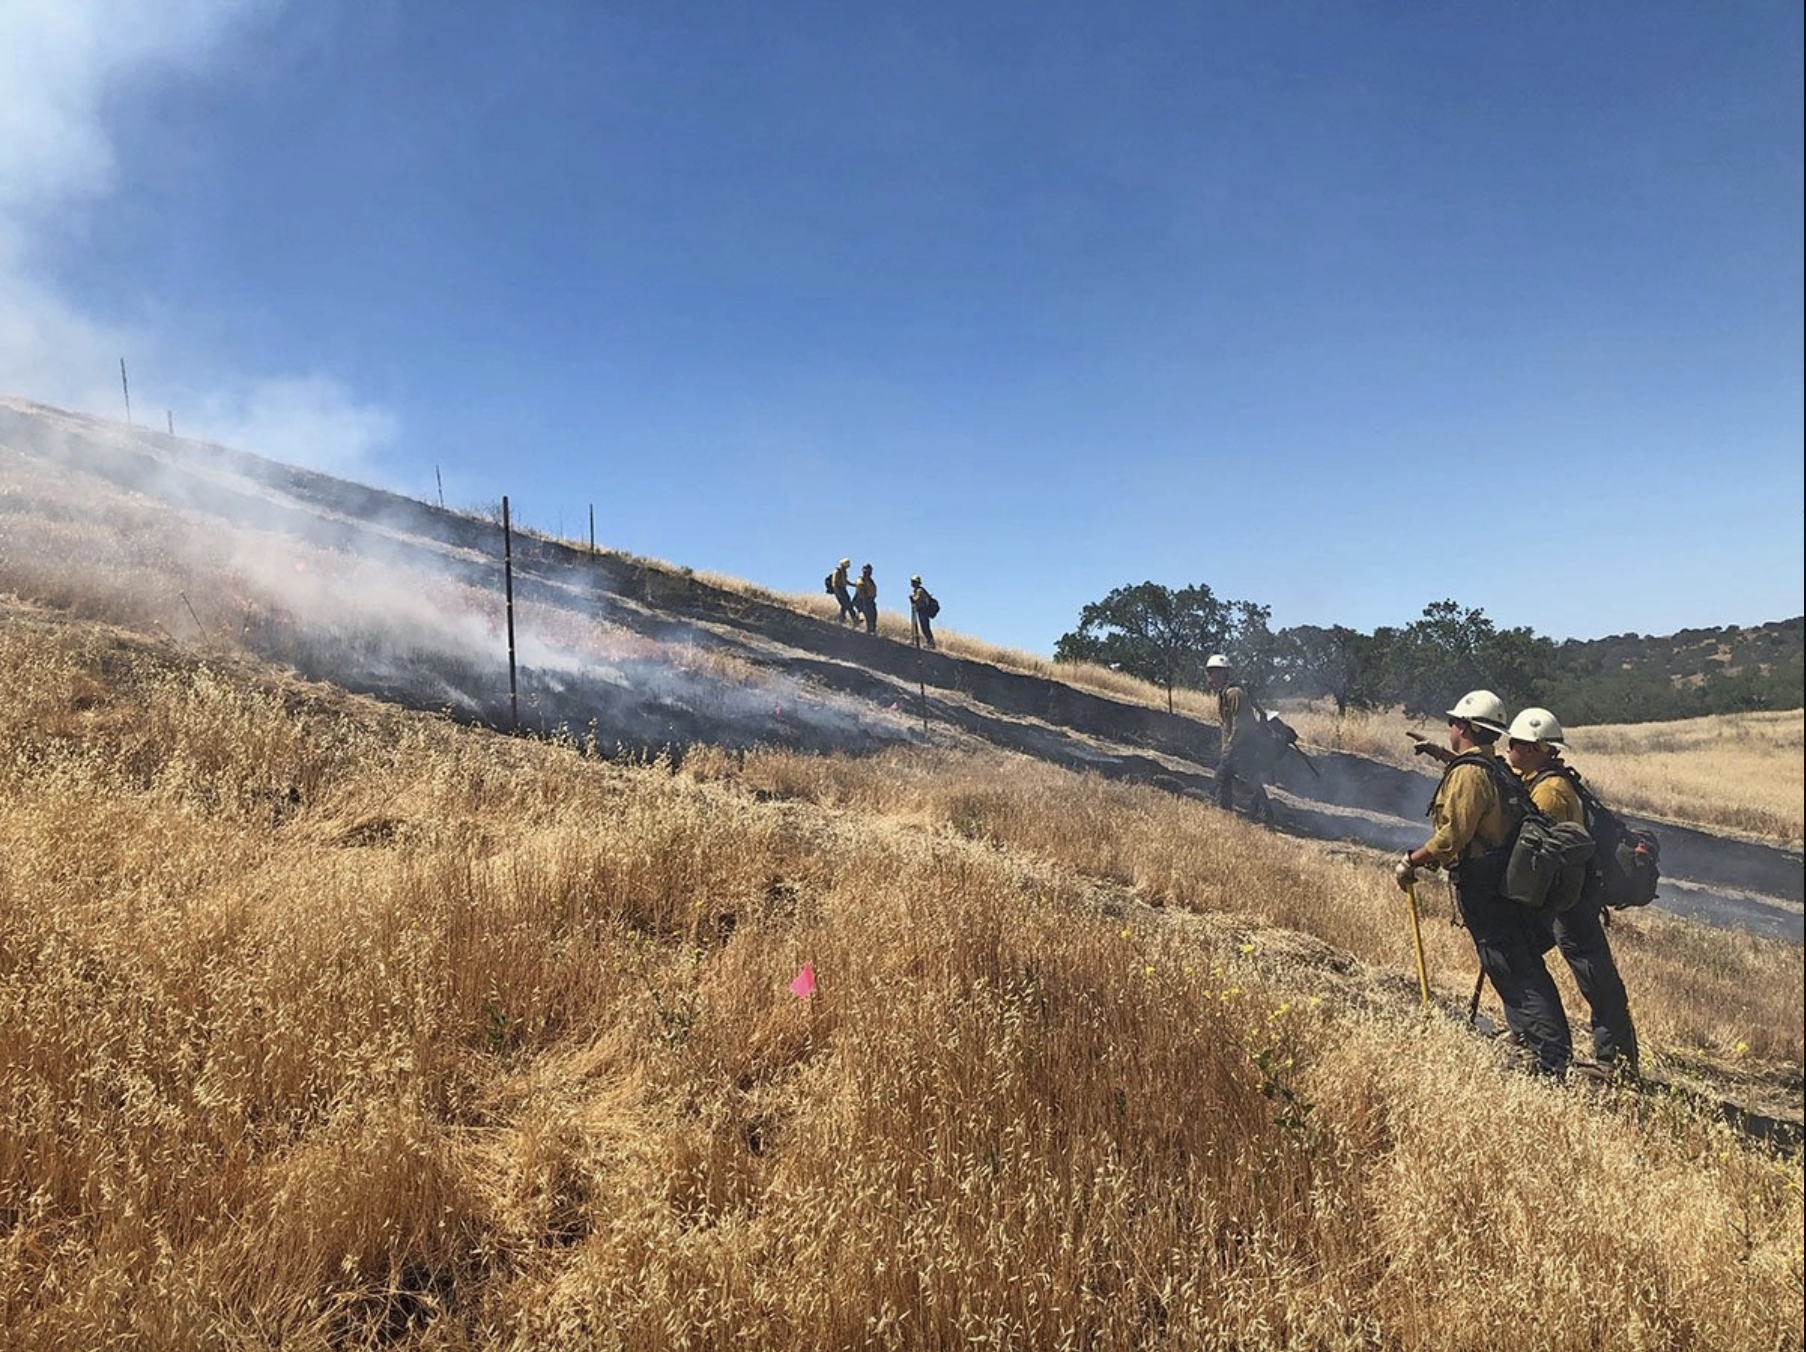 Firefighters extinguishing a prescribed burn